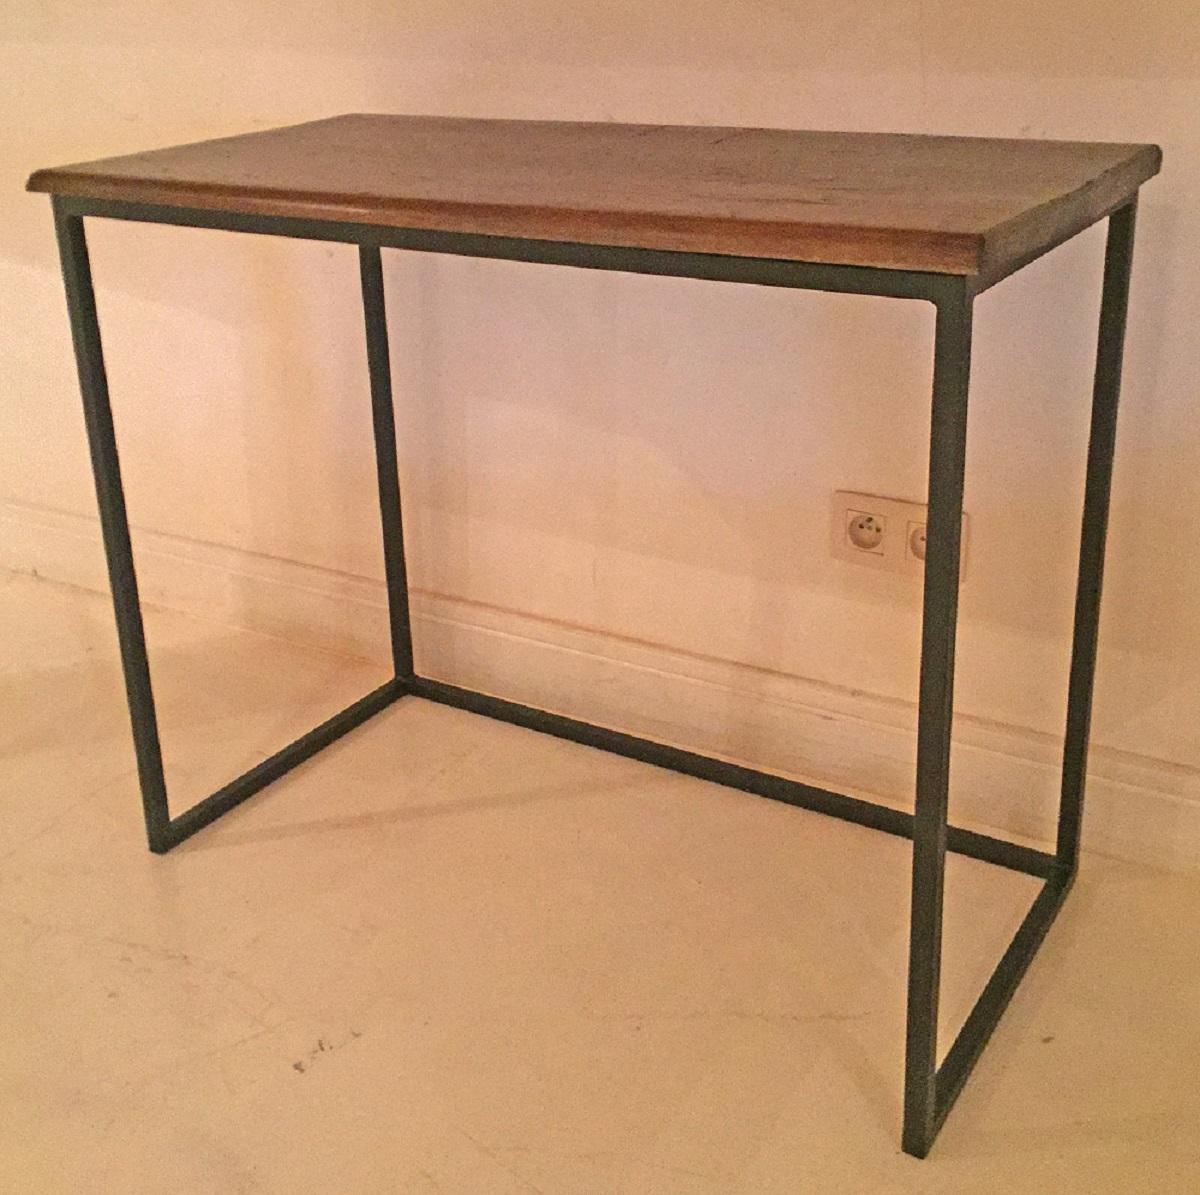 A small writing or side table with a 18th century Italian walnut top on a custom made iron base. The top is one piece of walnut with great color and patina.